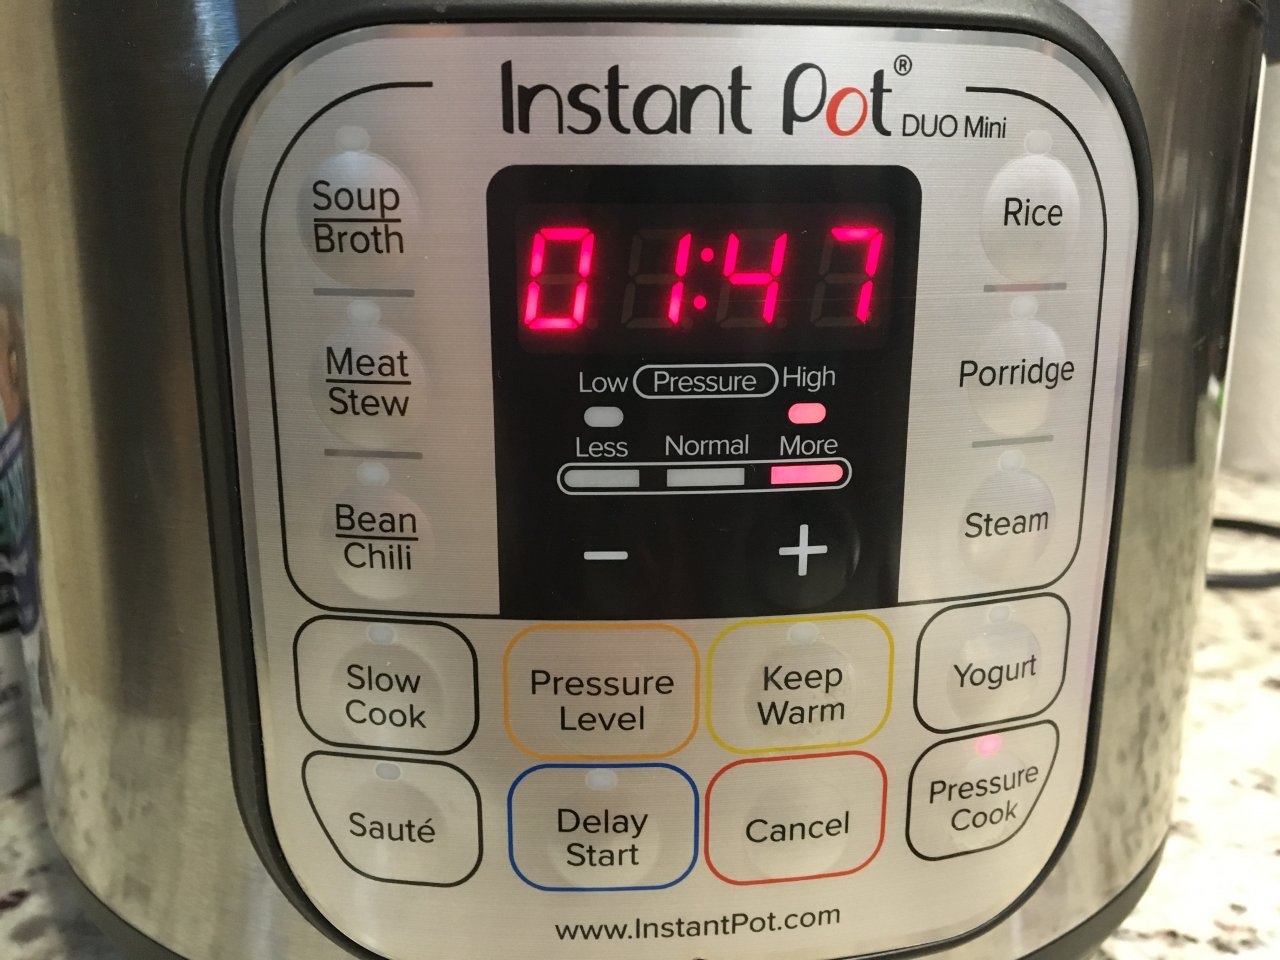 Instant Pot in action